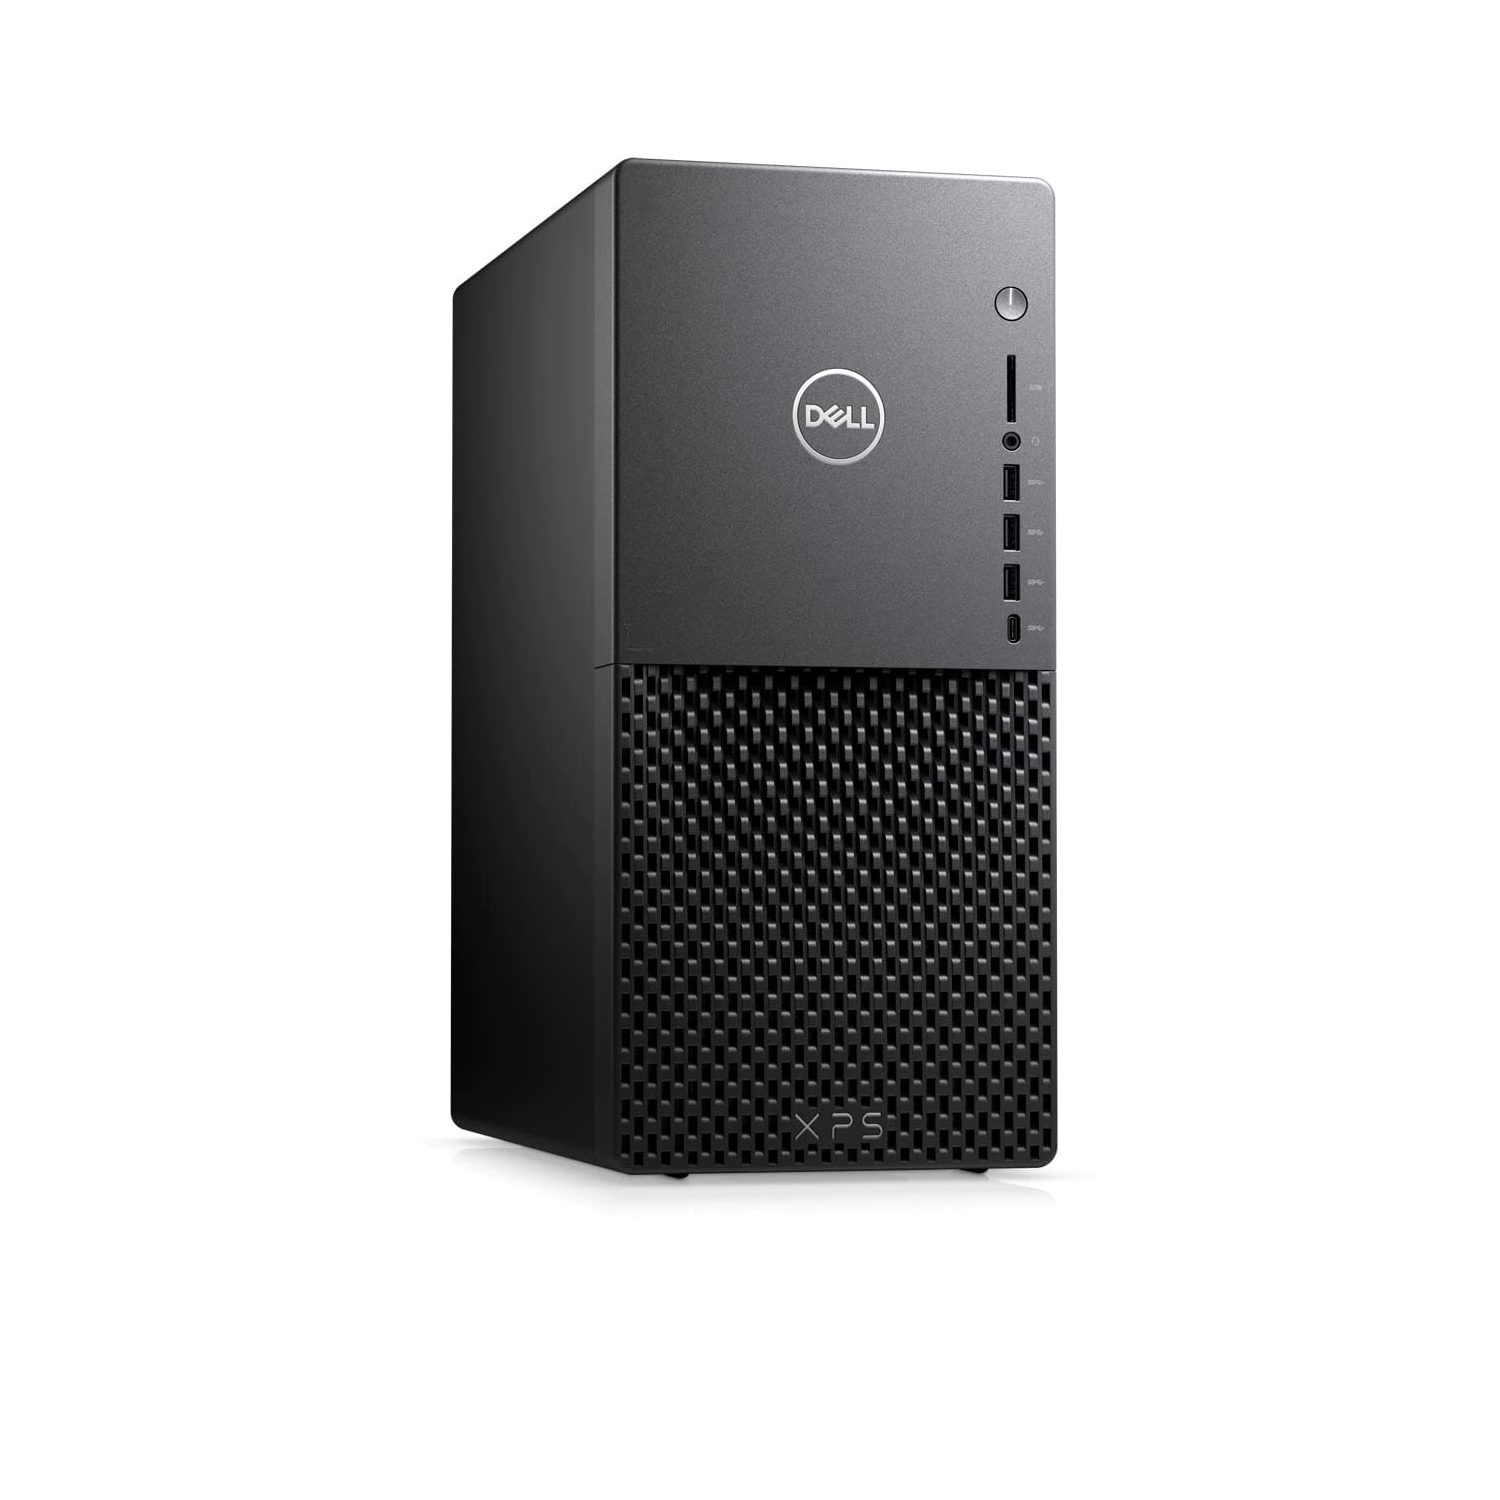 Refurbished (Excellent) - Dell XPS 8940 Desktop (2020) | Core i3 - 1TB HDD - 8GB RAM - RX 5700 | 8 Cores @ 4.4 GHz - 10th Gen CPU Certified Refurbished